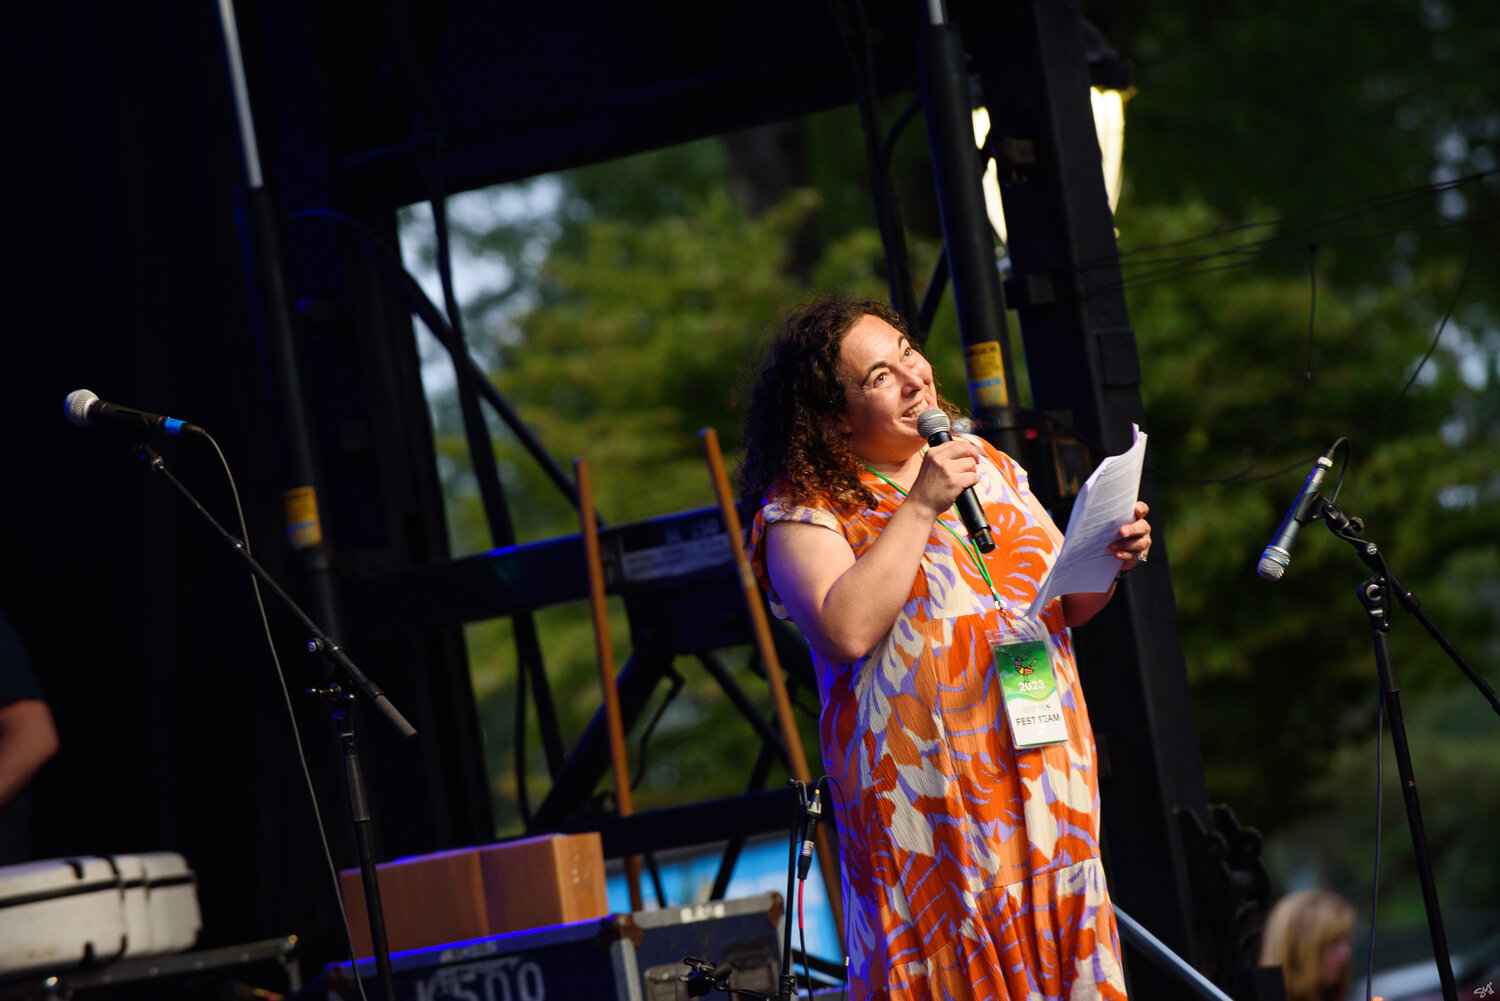 Maryland Folk Festival Manager Caroline O'Hare welcomes performers, artists and spectators to the 2023 event.